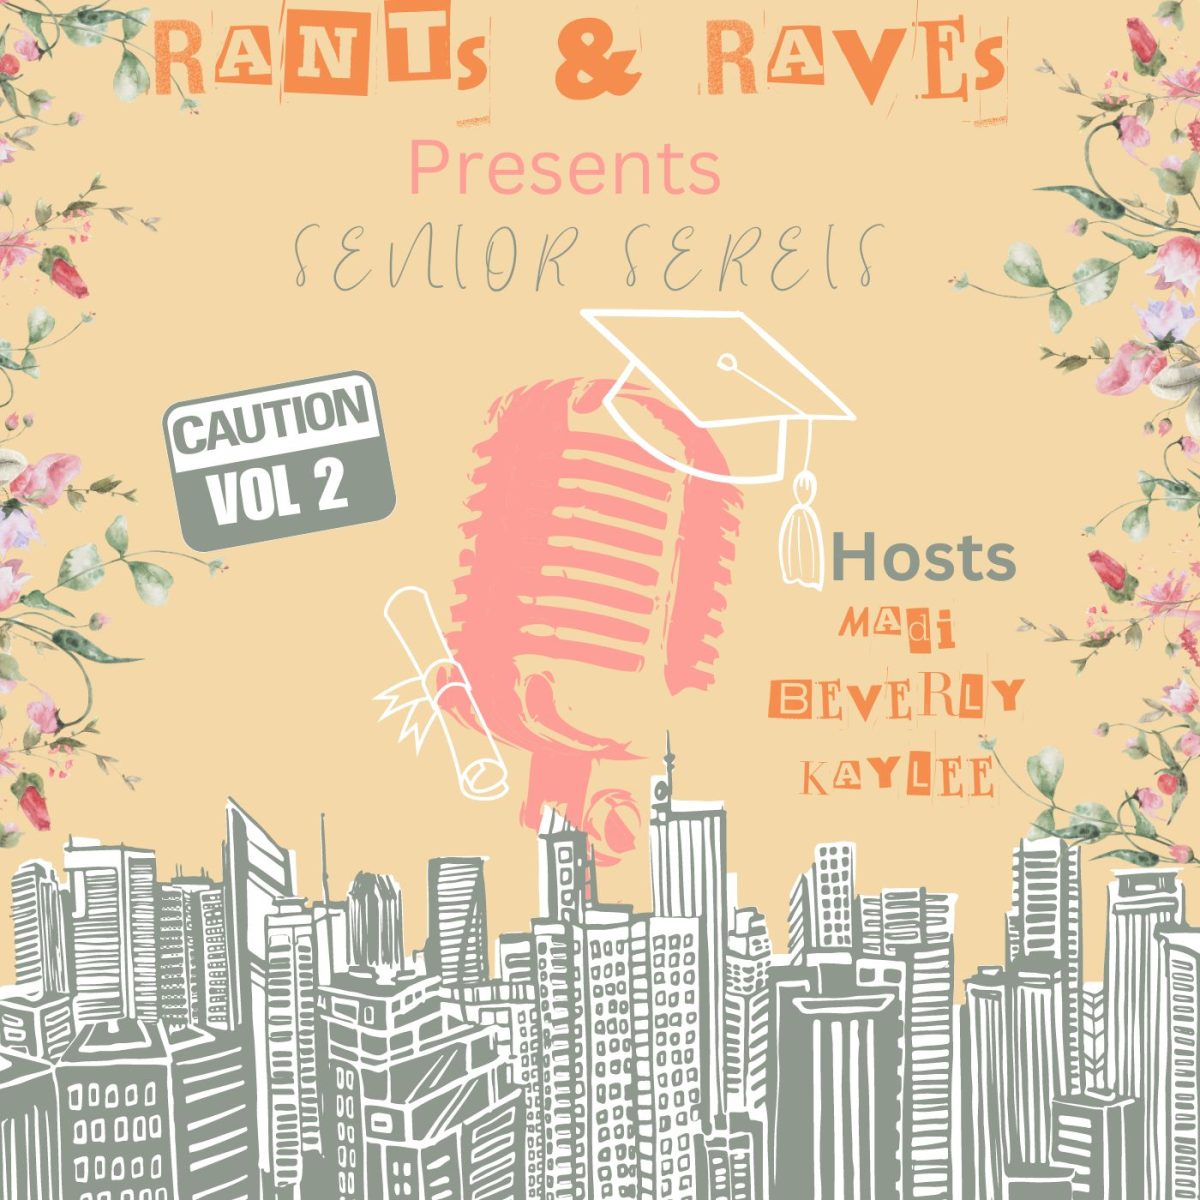 Shes back! Rants & Raves presents: Senior series with Mo